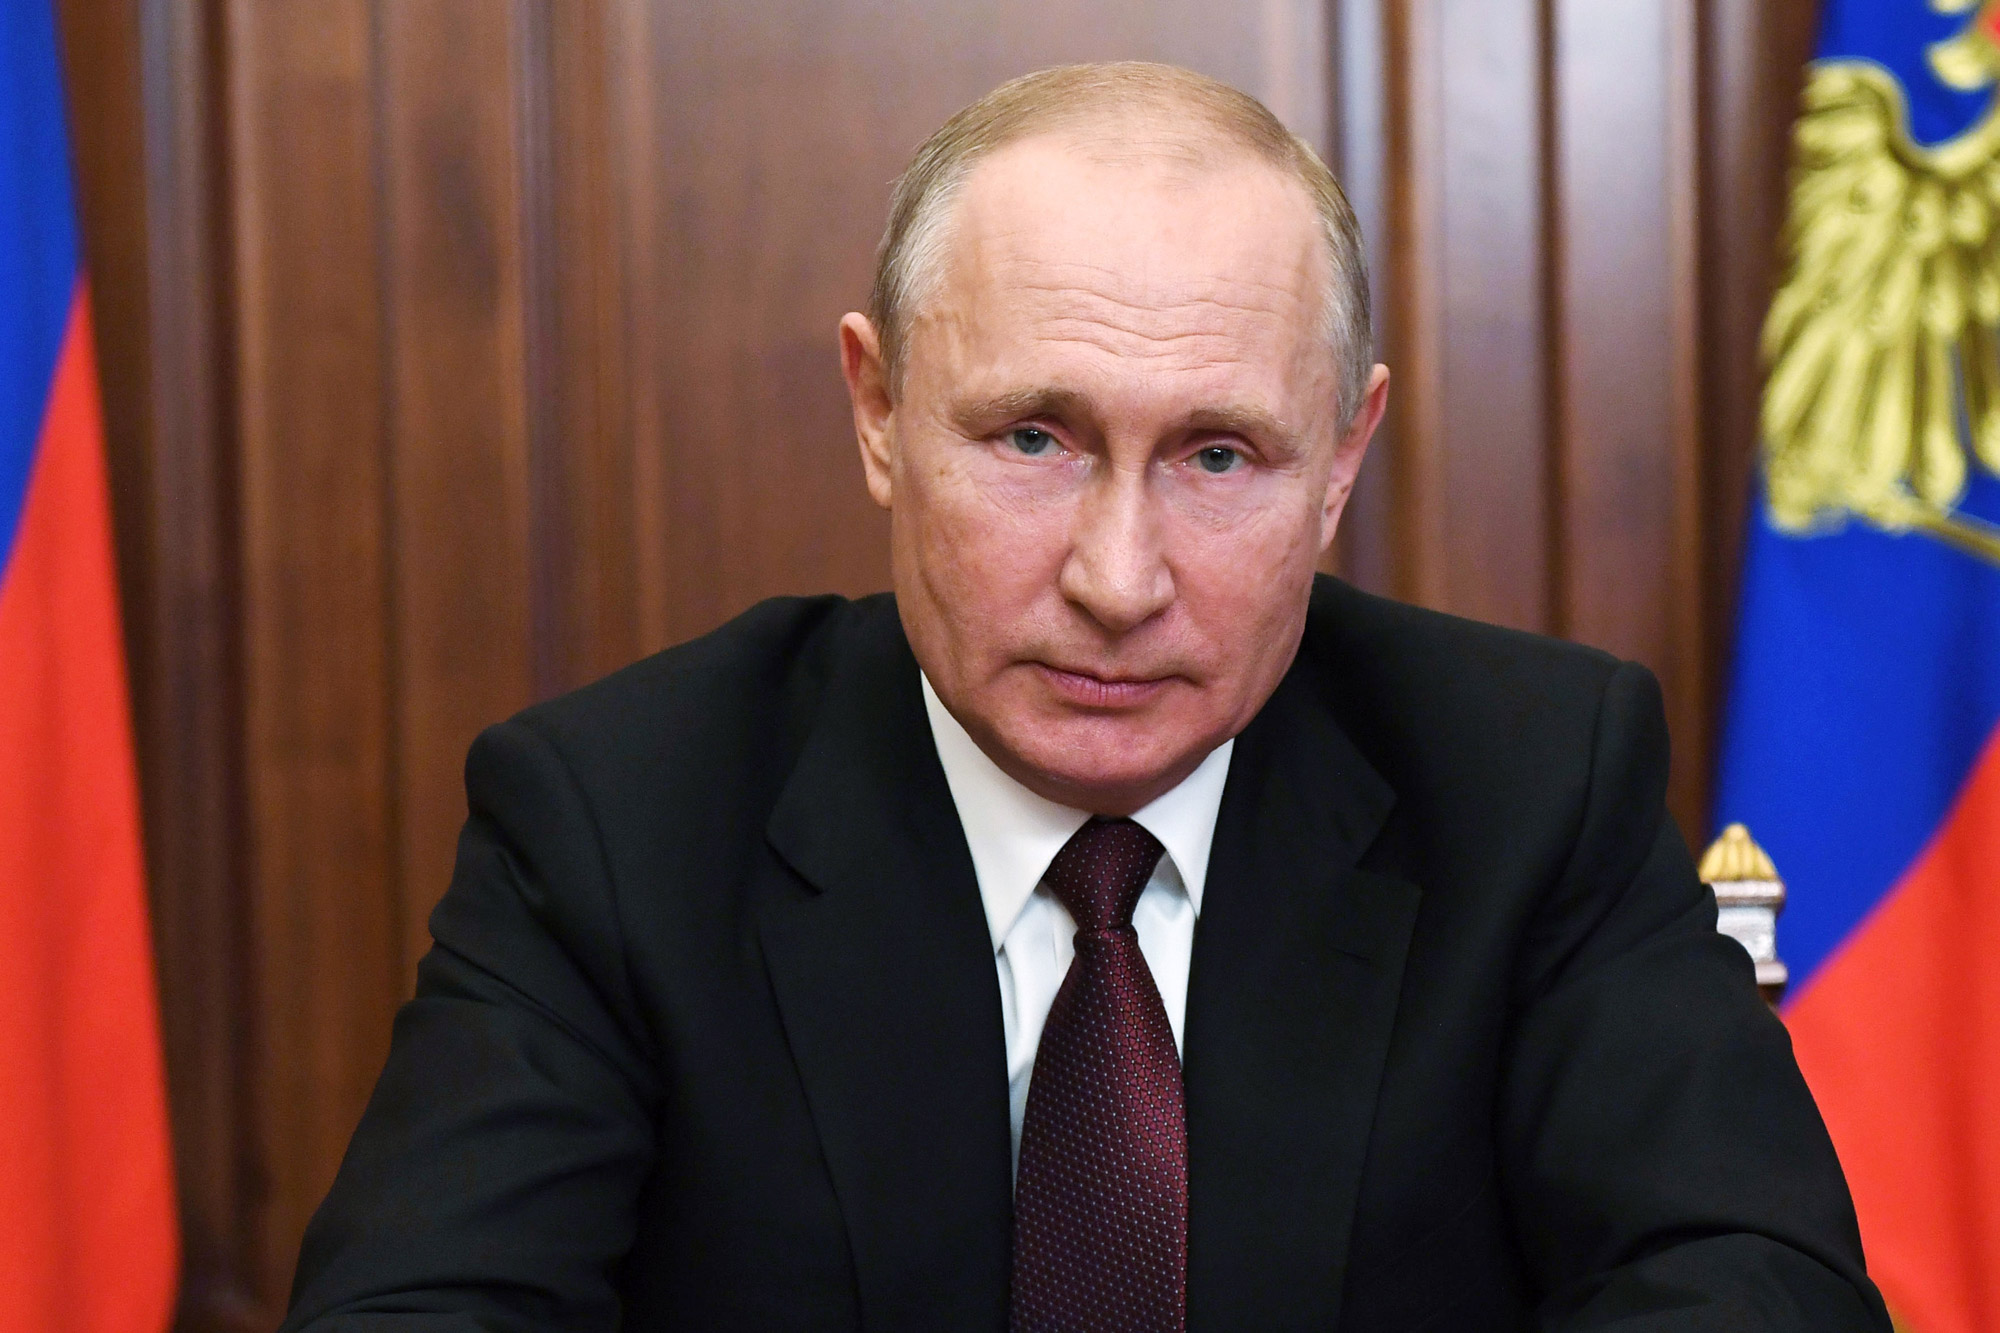 Russian President Vladimir Putin gives a televised address to the nation in Moscow on June 23.